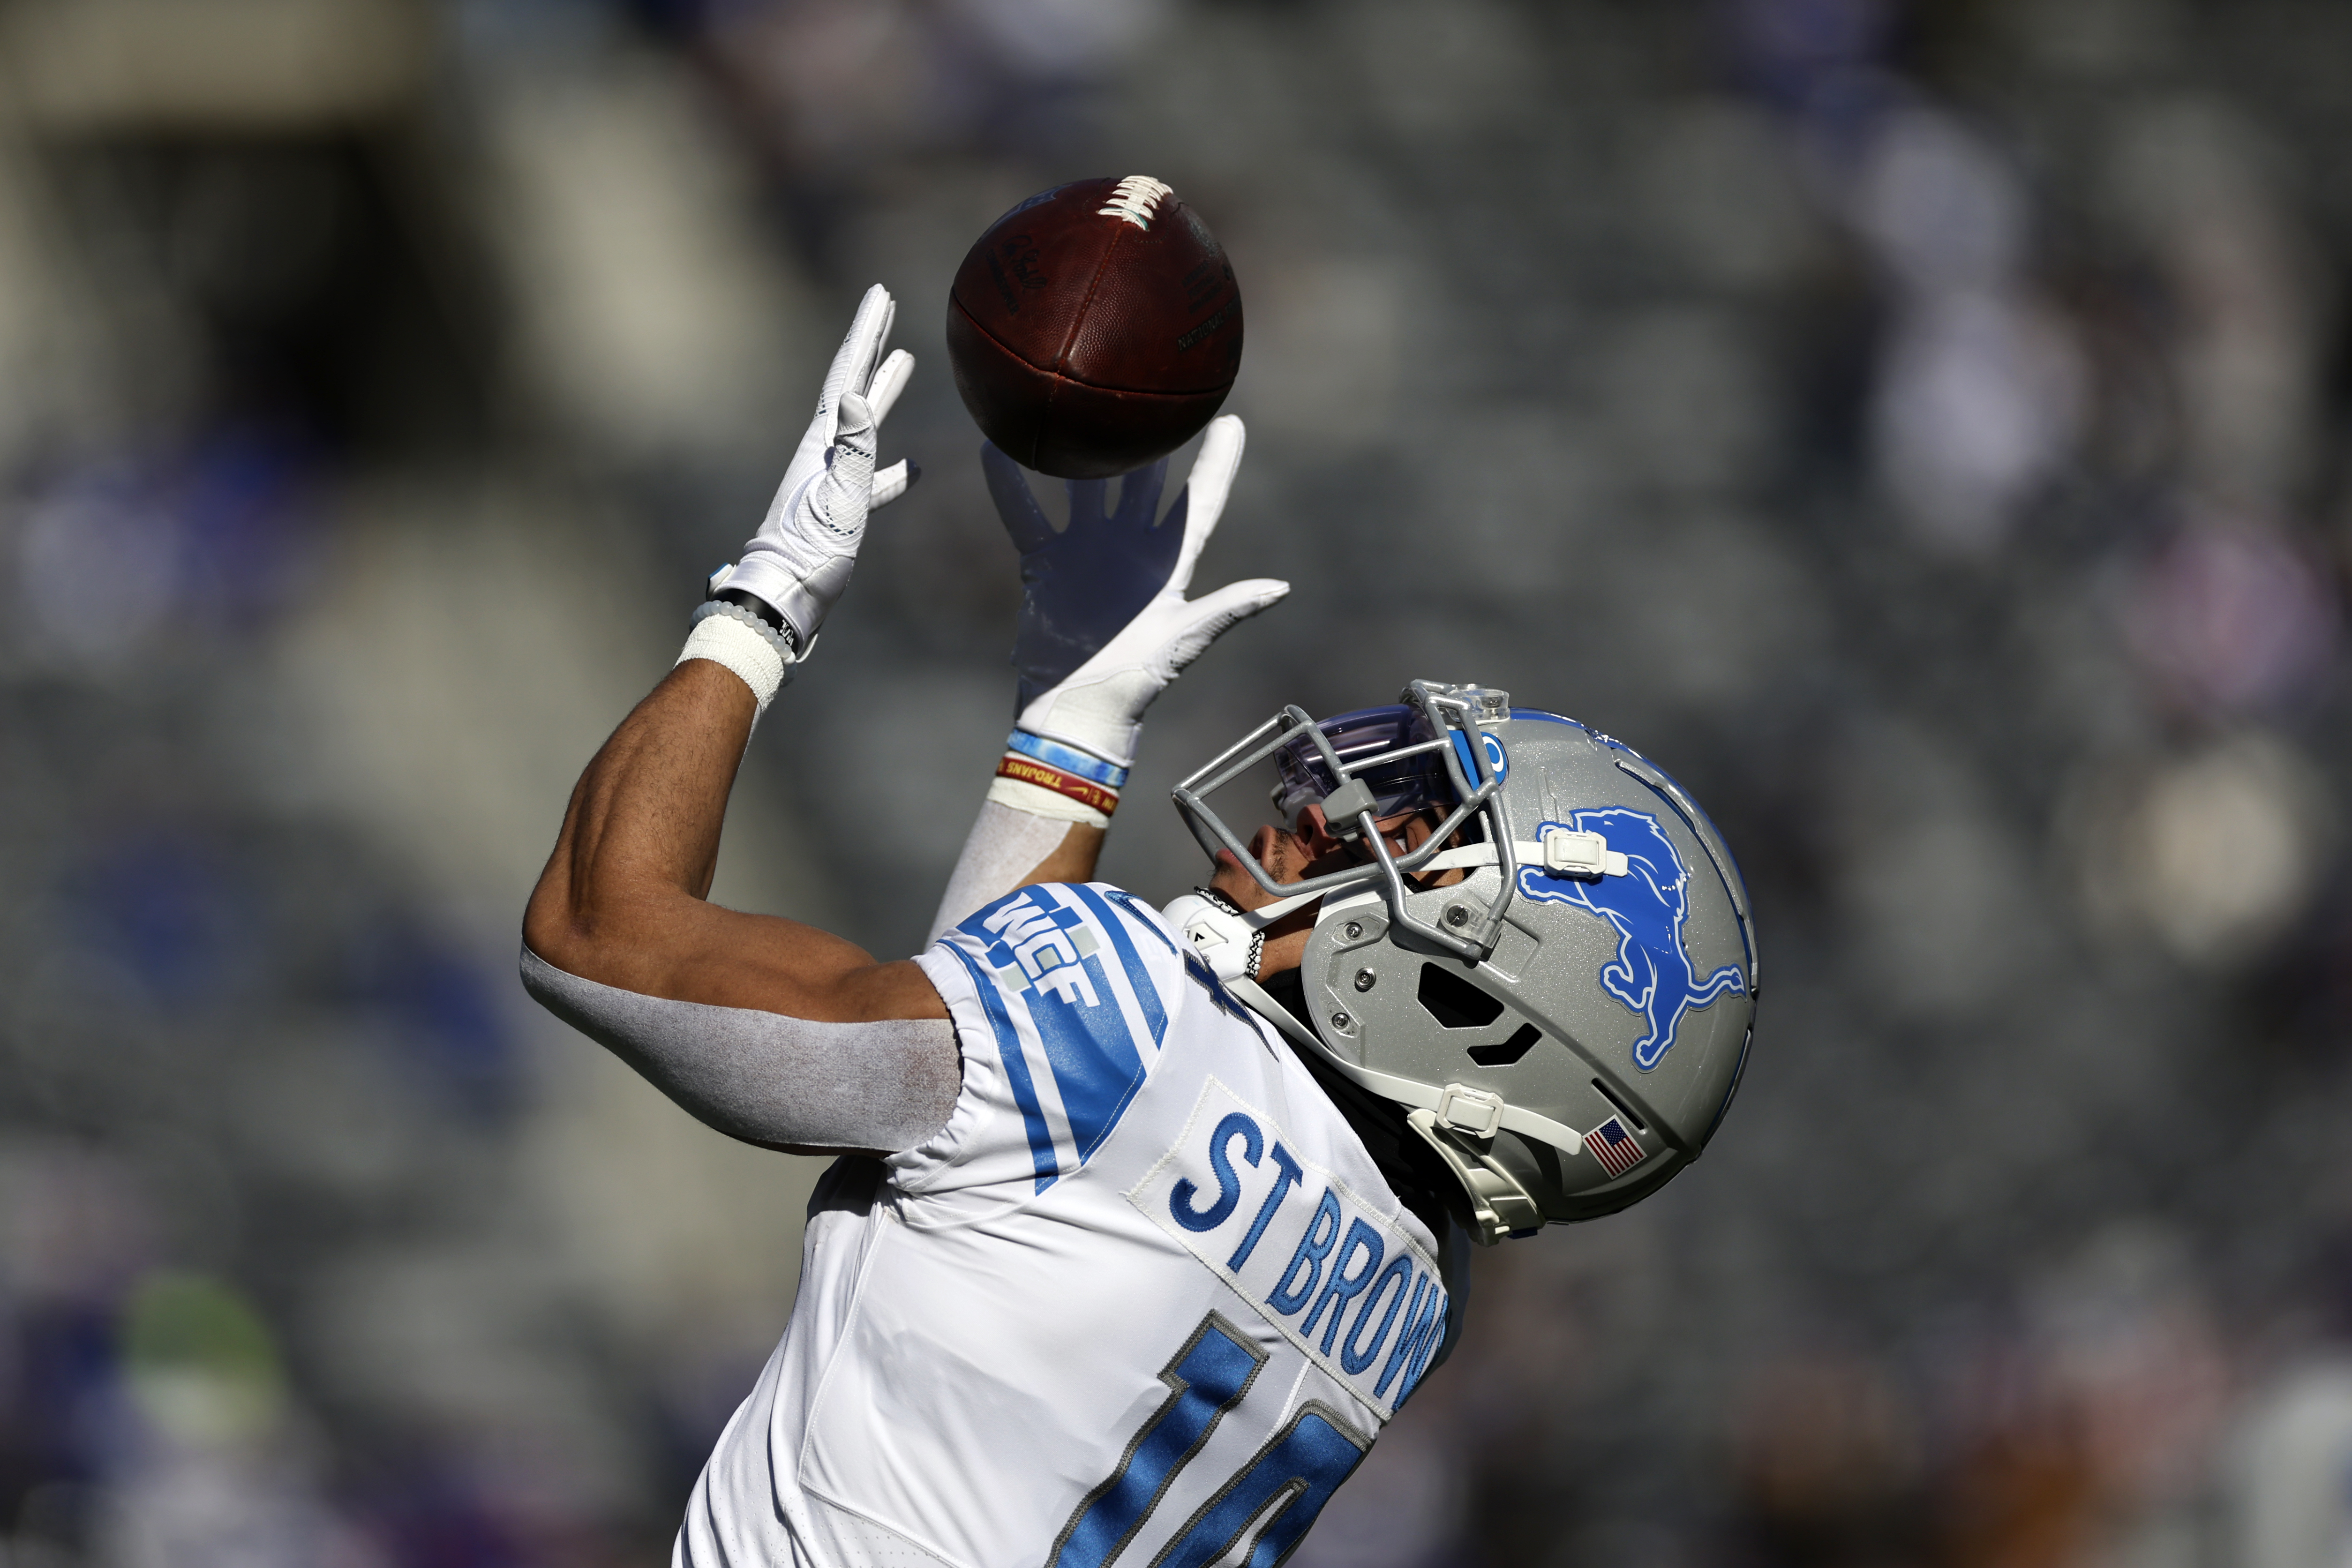 Lions WR Amon-Ra St. Brown is 'playing like a top-5, top-10